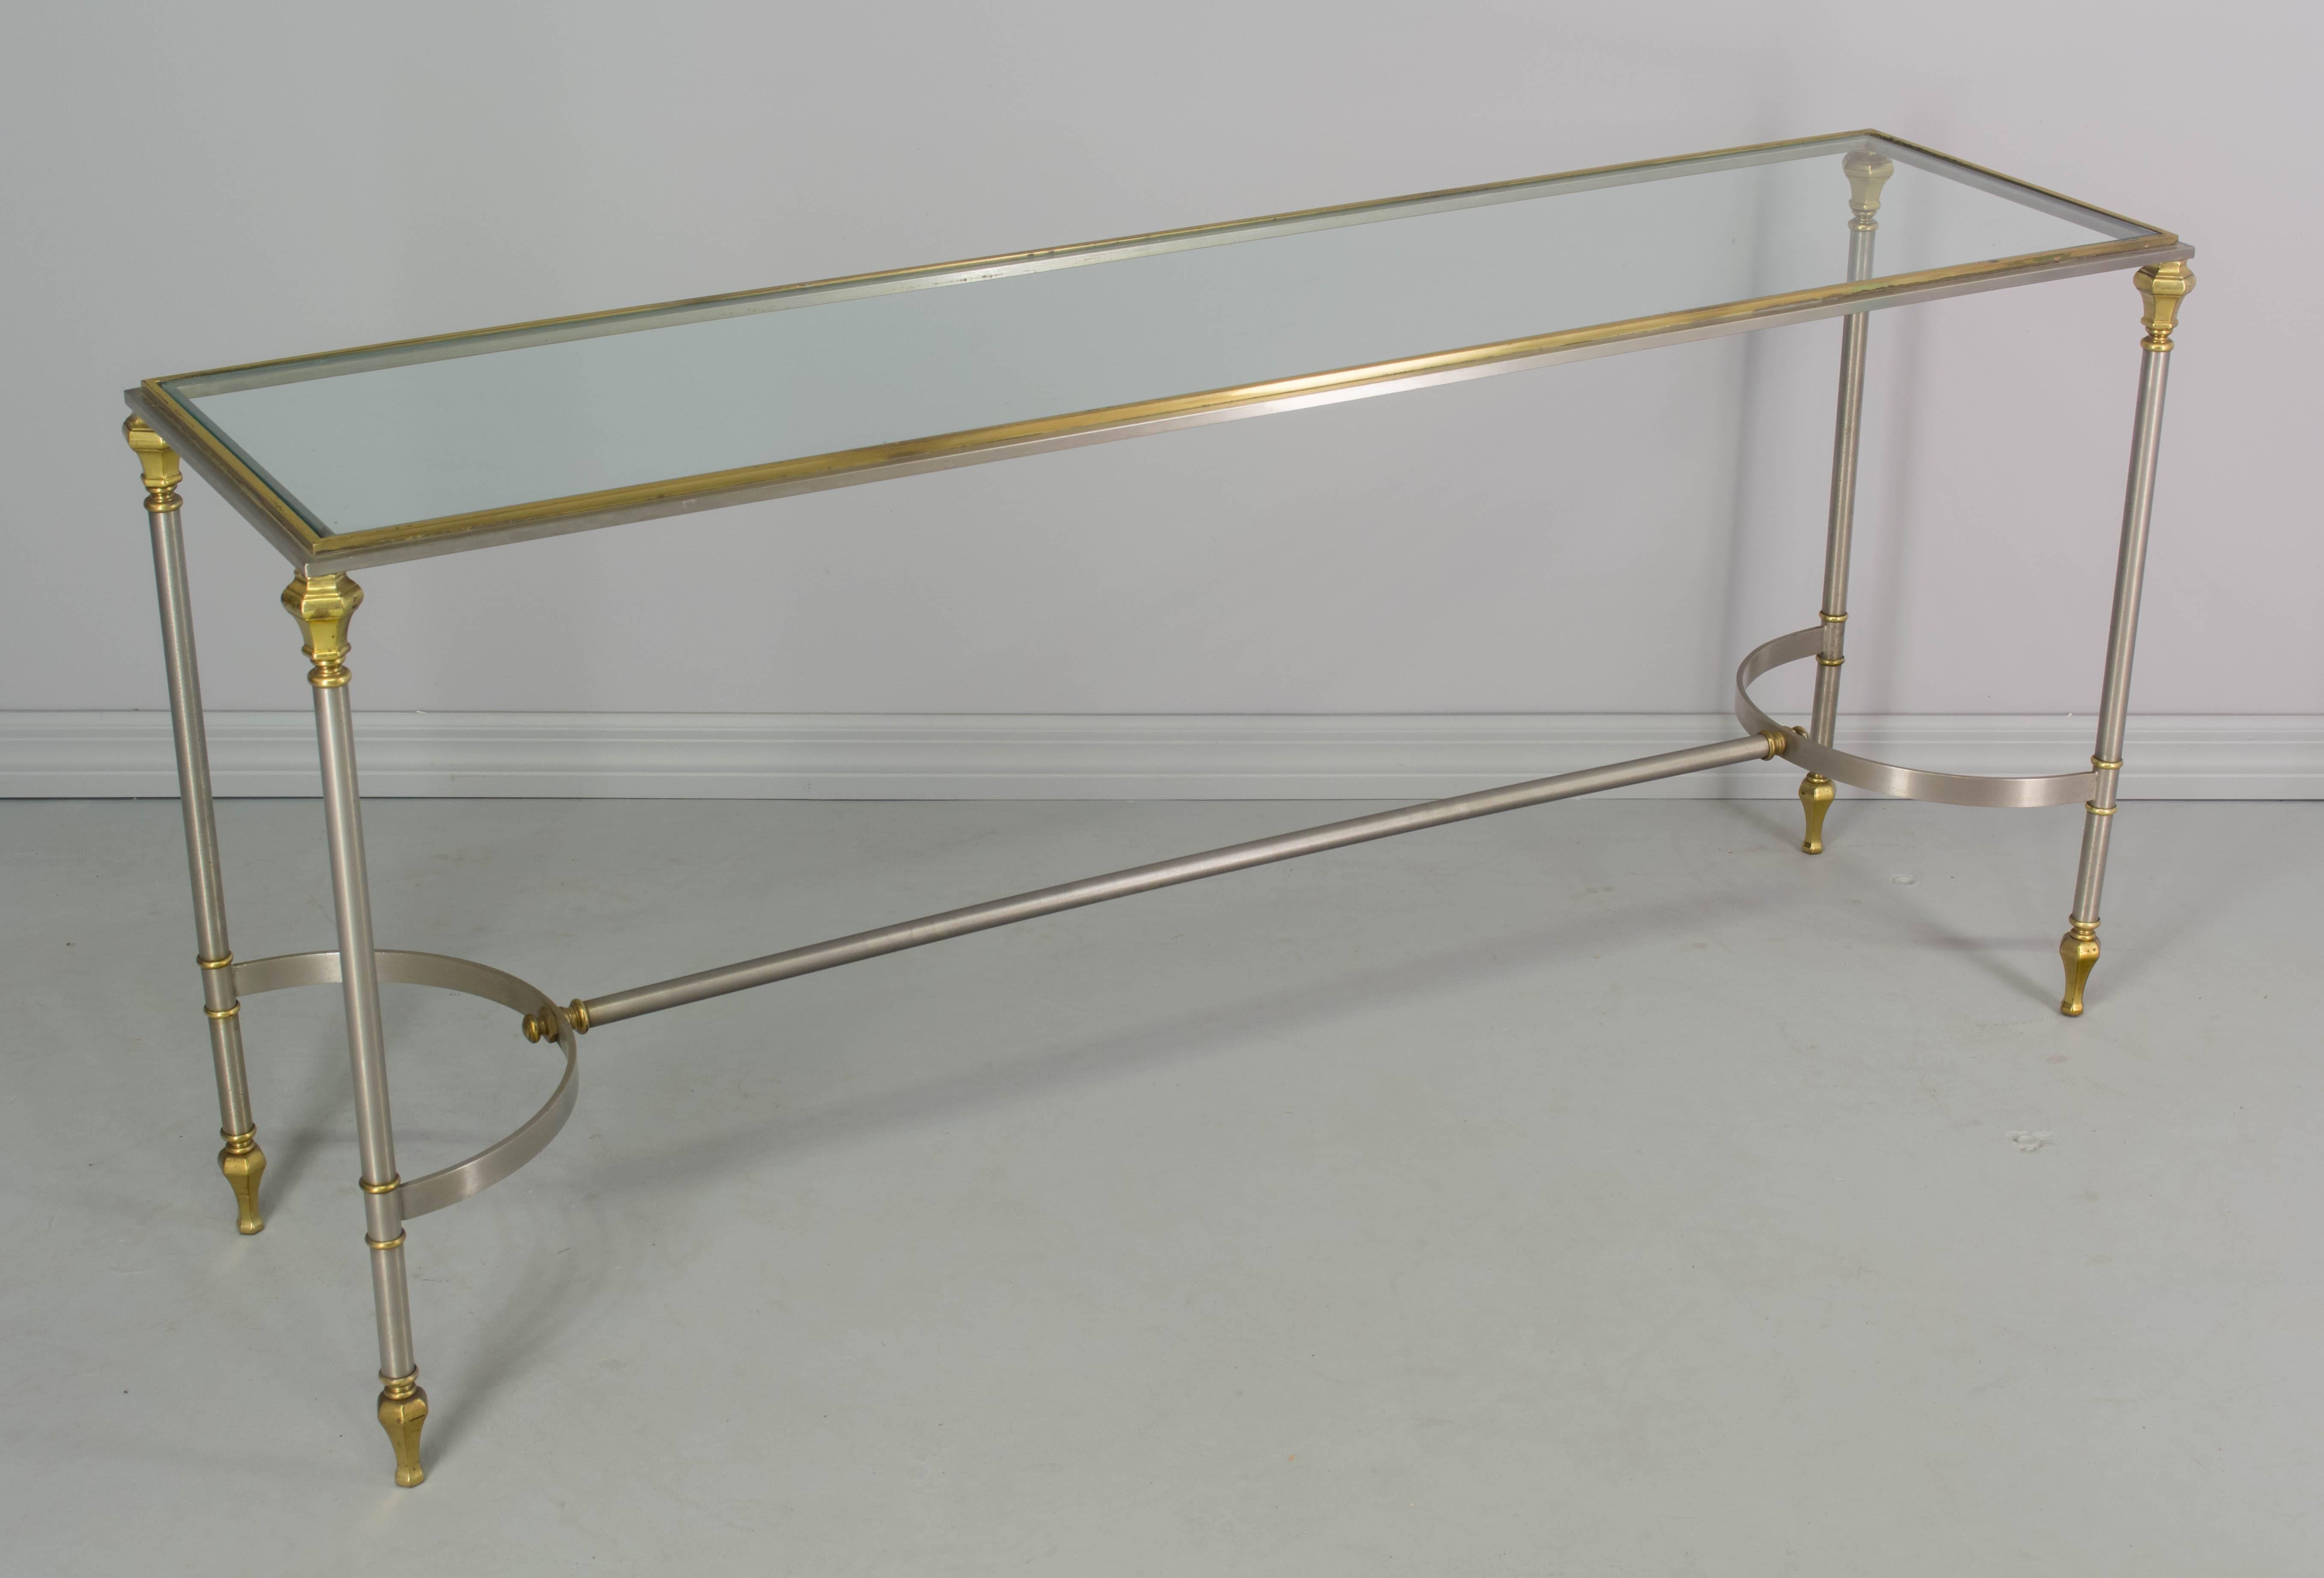 An elegant Mid-Century Modern console or sofa table in the style of Maison Jansen. Brushed steel with brass accents and glass top. We have a large selection of French antiques. Please visit our web site.
 